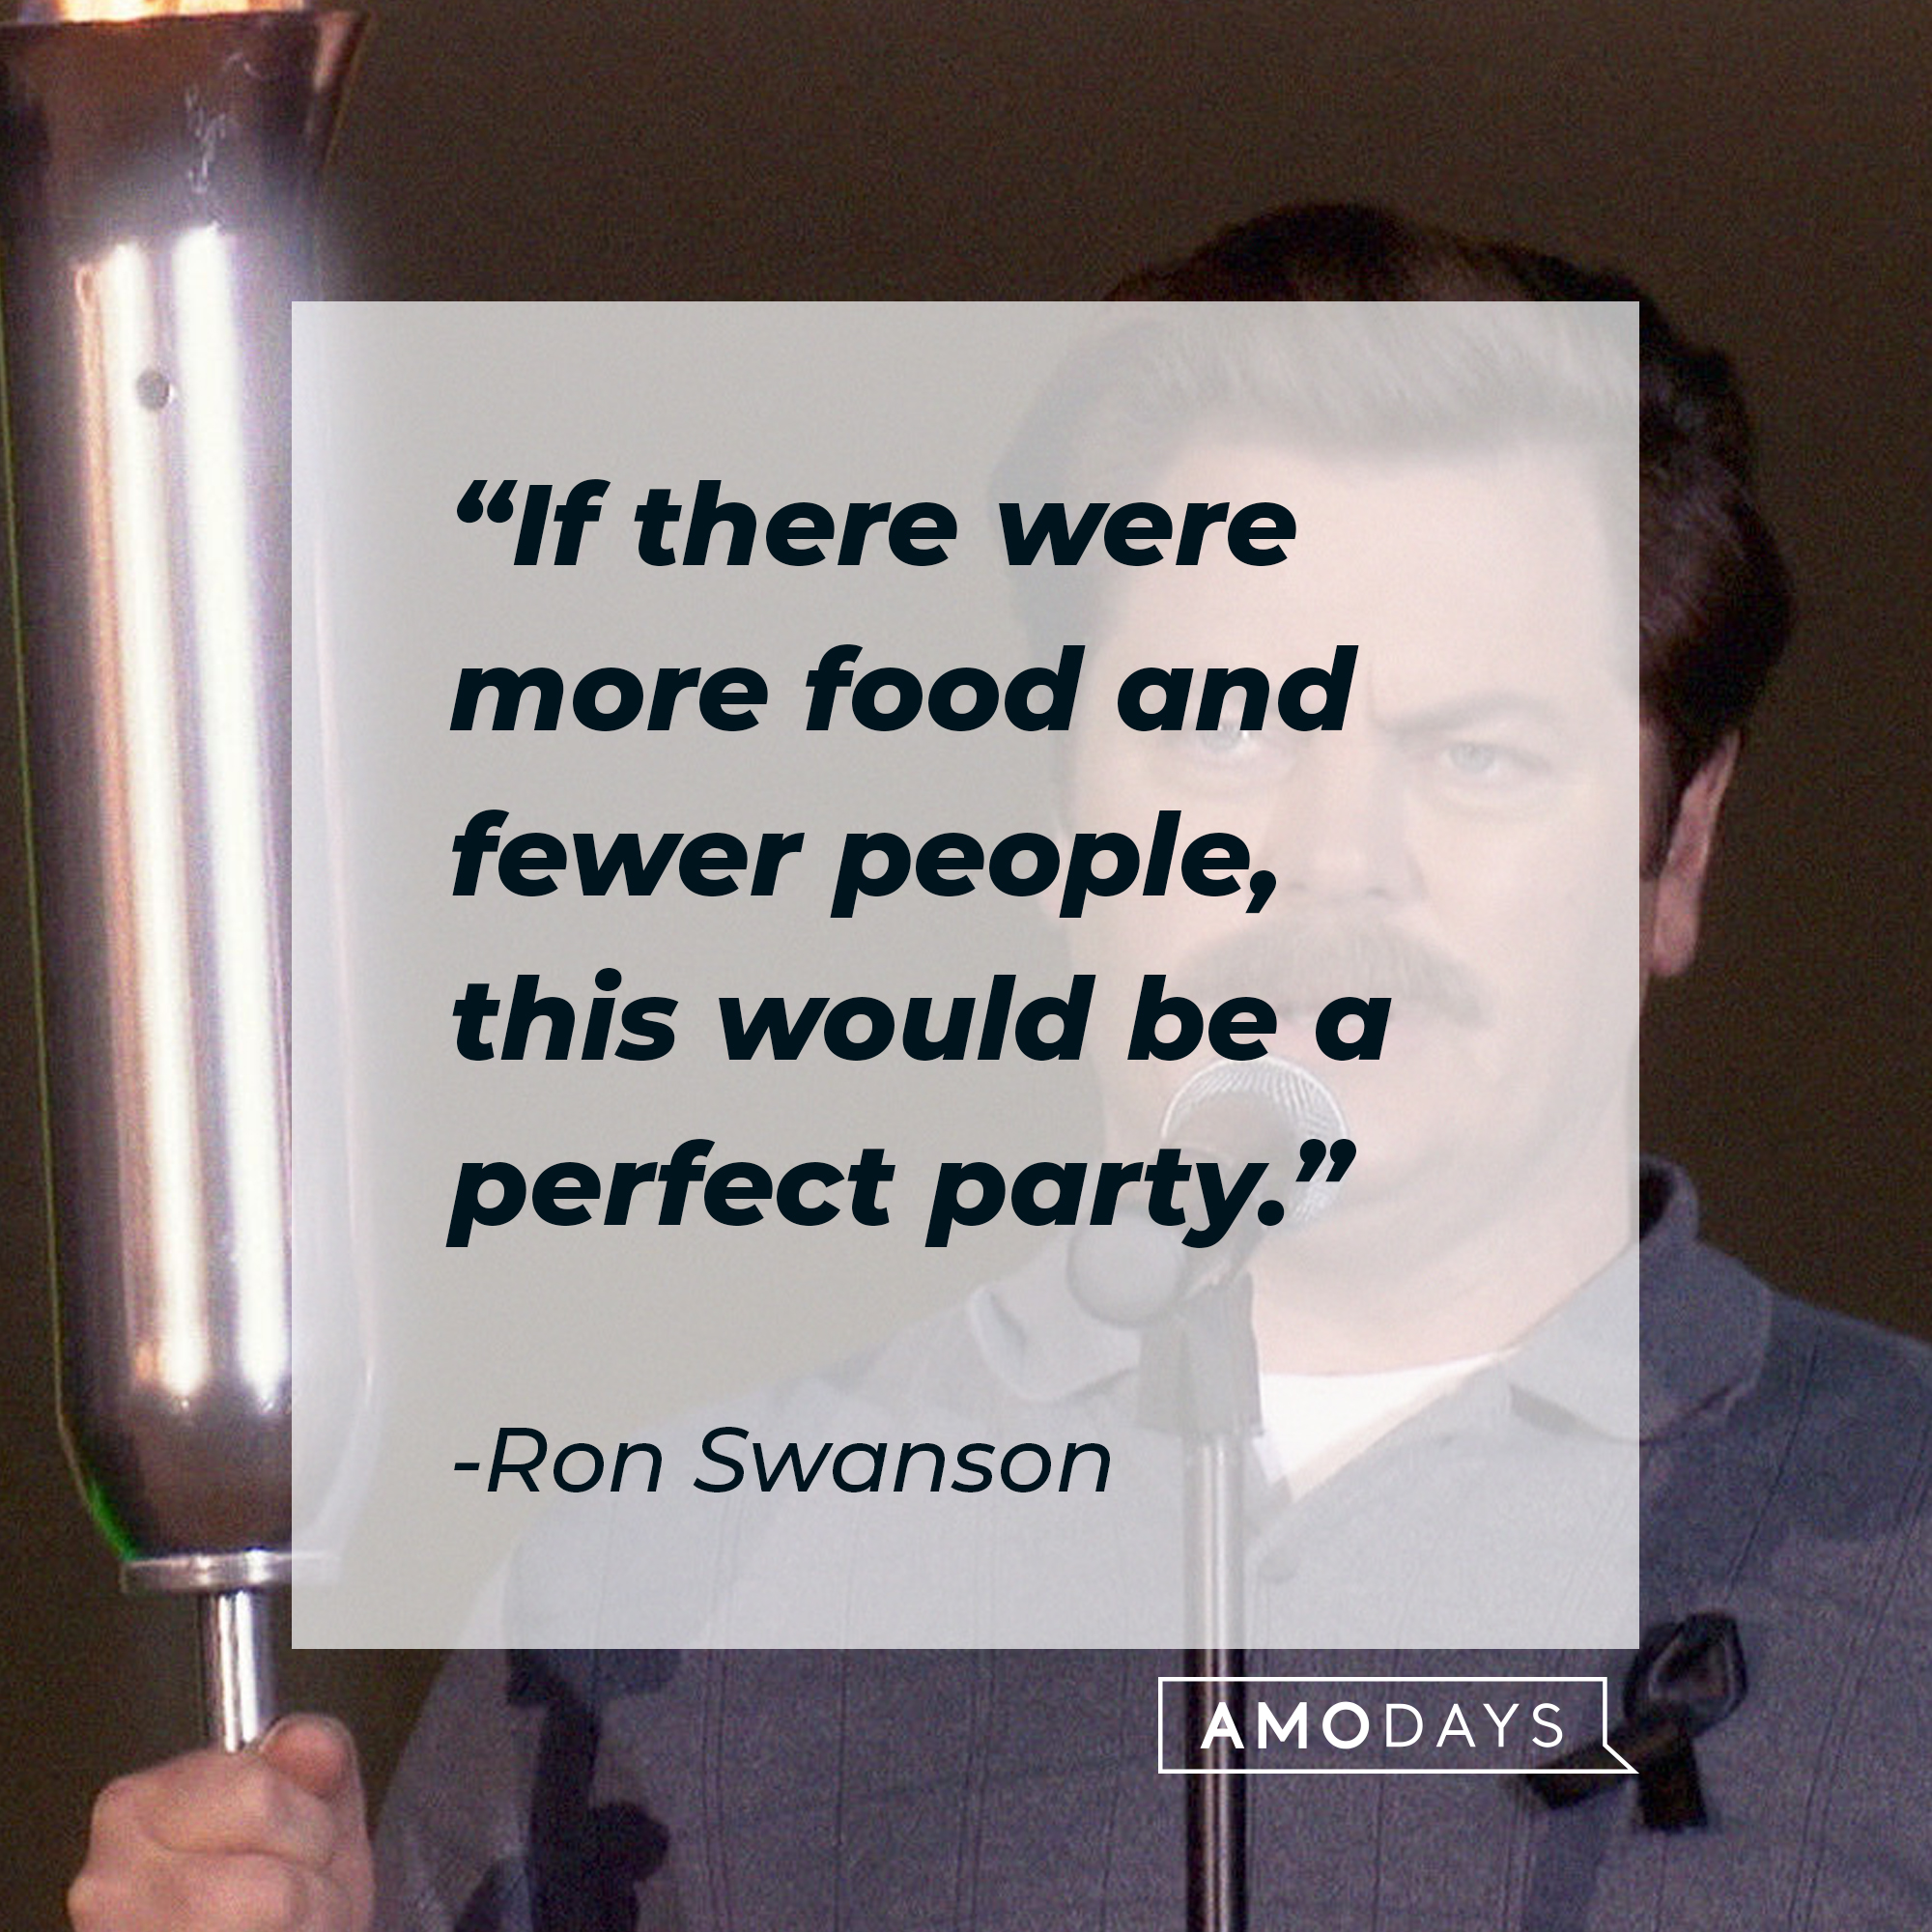 Ron Swanson’s quote: "If there were more food and fewer people, this would be a perfect party." | Image: Facebook.com/parksandrecreation